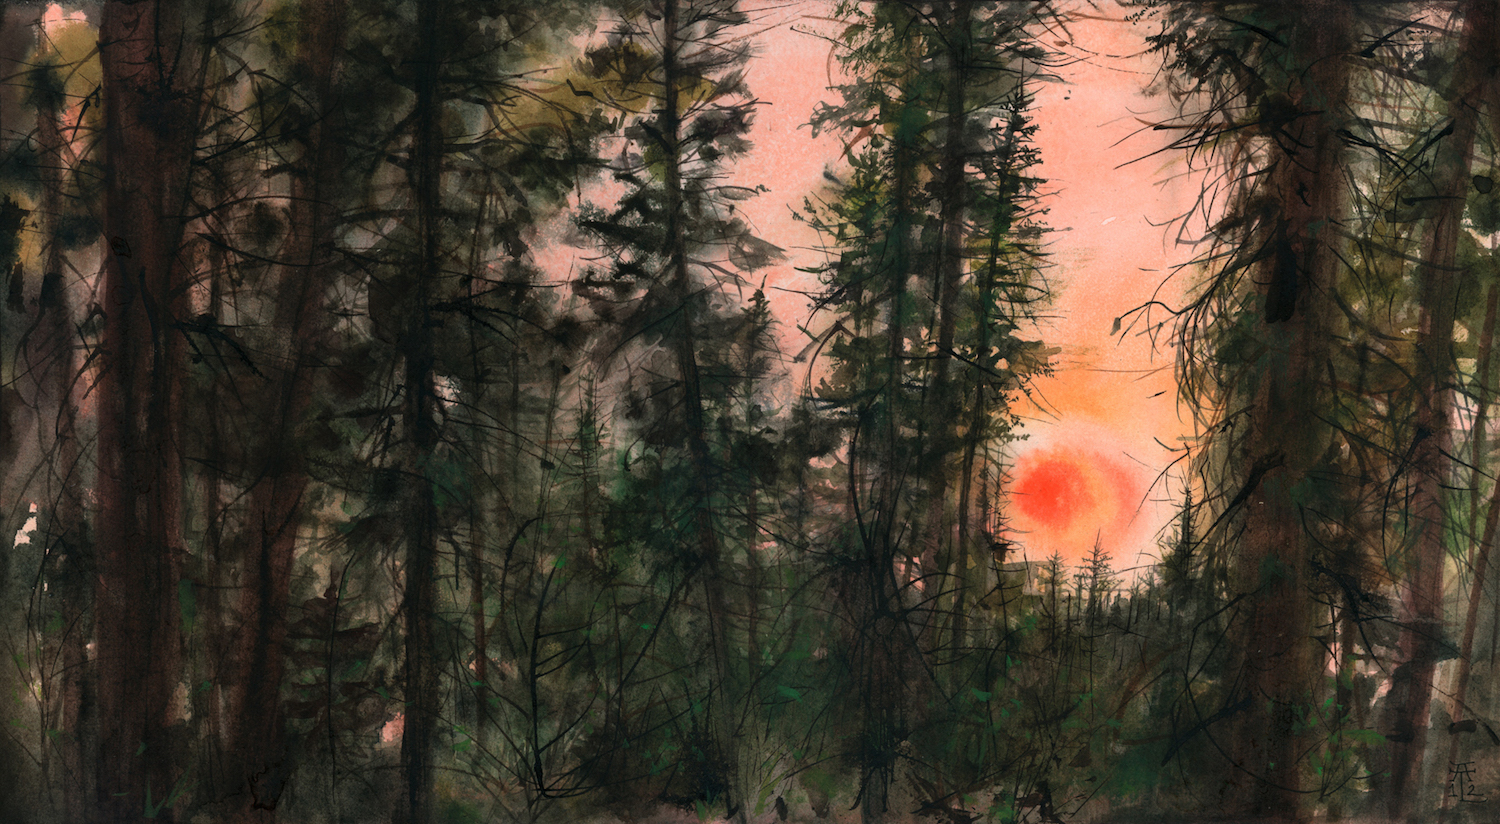 In Forests No. 32 | Dorst Creek Sunset